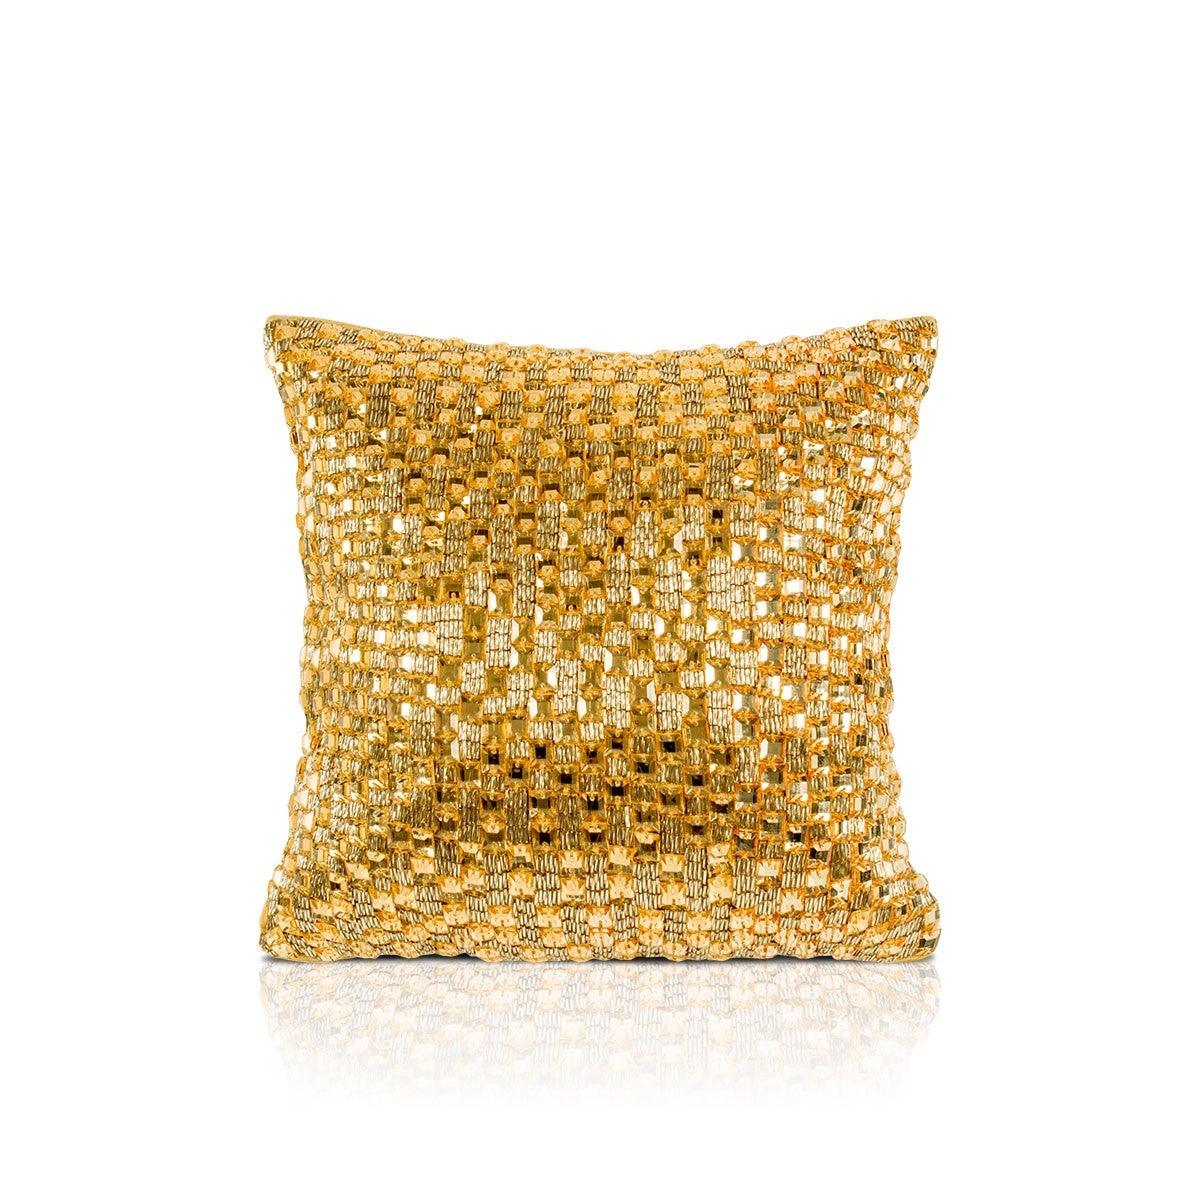 Aabir 12 In X12 In Gold Cushion Cover - Home4u